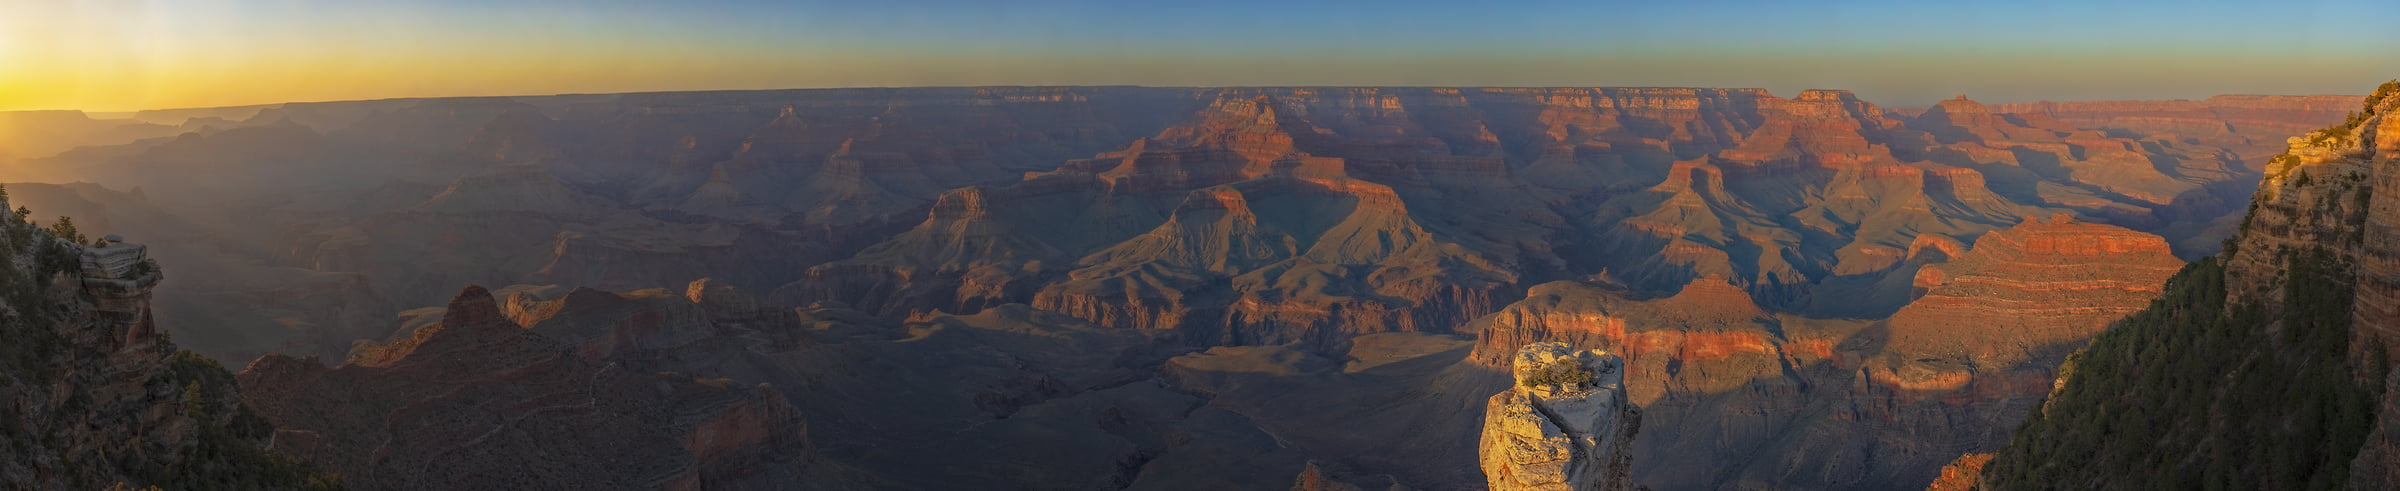 3,645 megapixels! A very high resolution, large-format VAST photo print of the Grand Canyon at sunset; panorama landscape photograph created by John Freeman in Yaki Point, South Rim, Grand Canyon, Arizona.